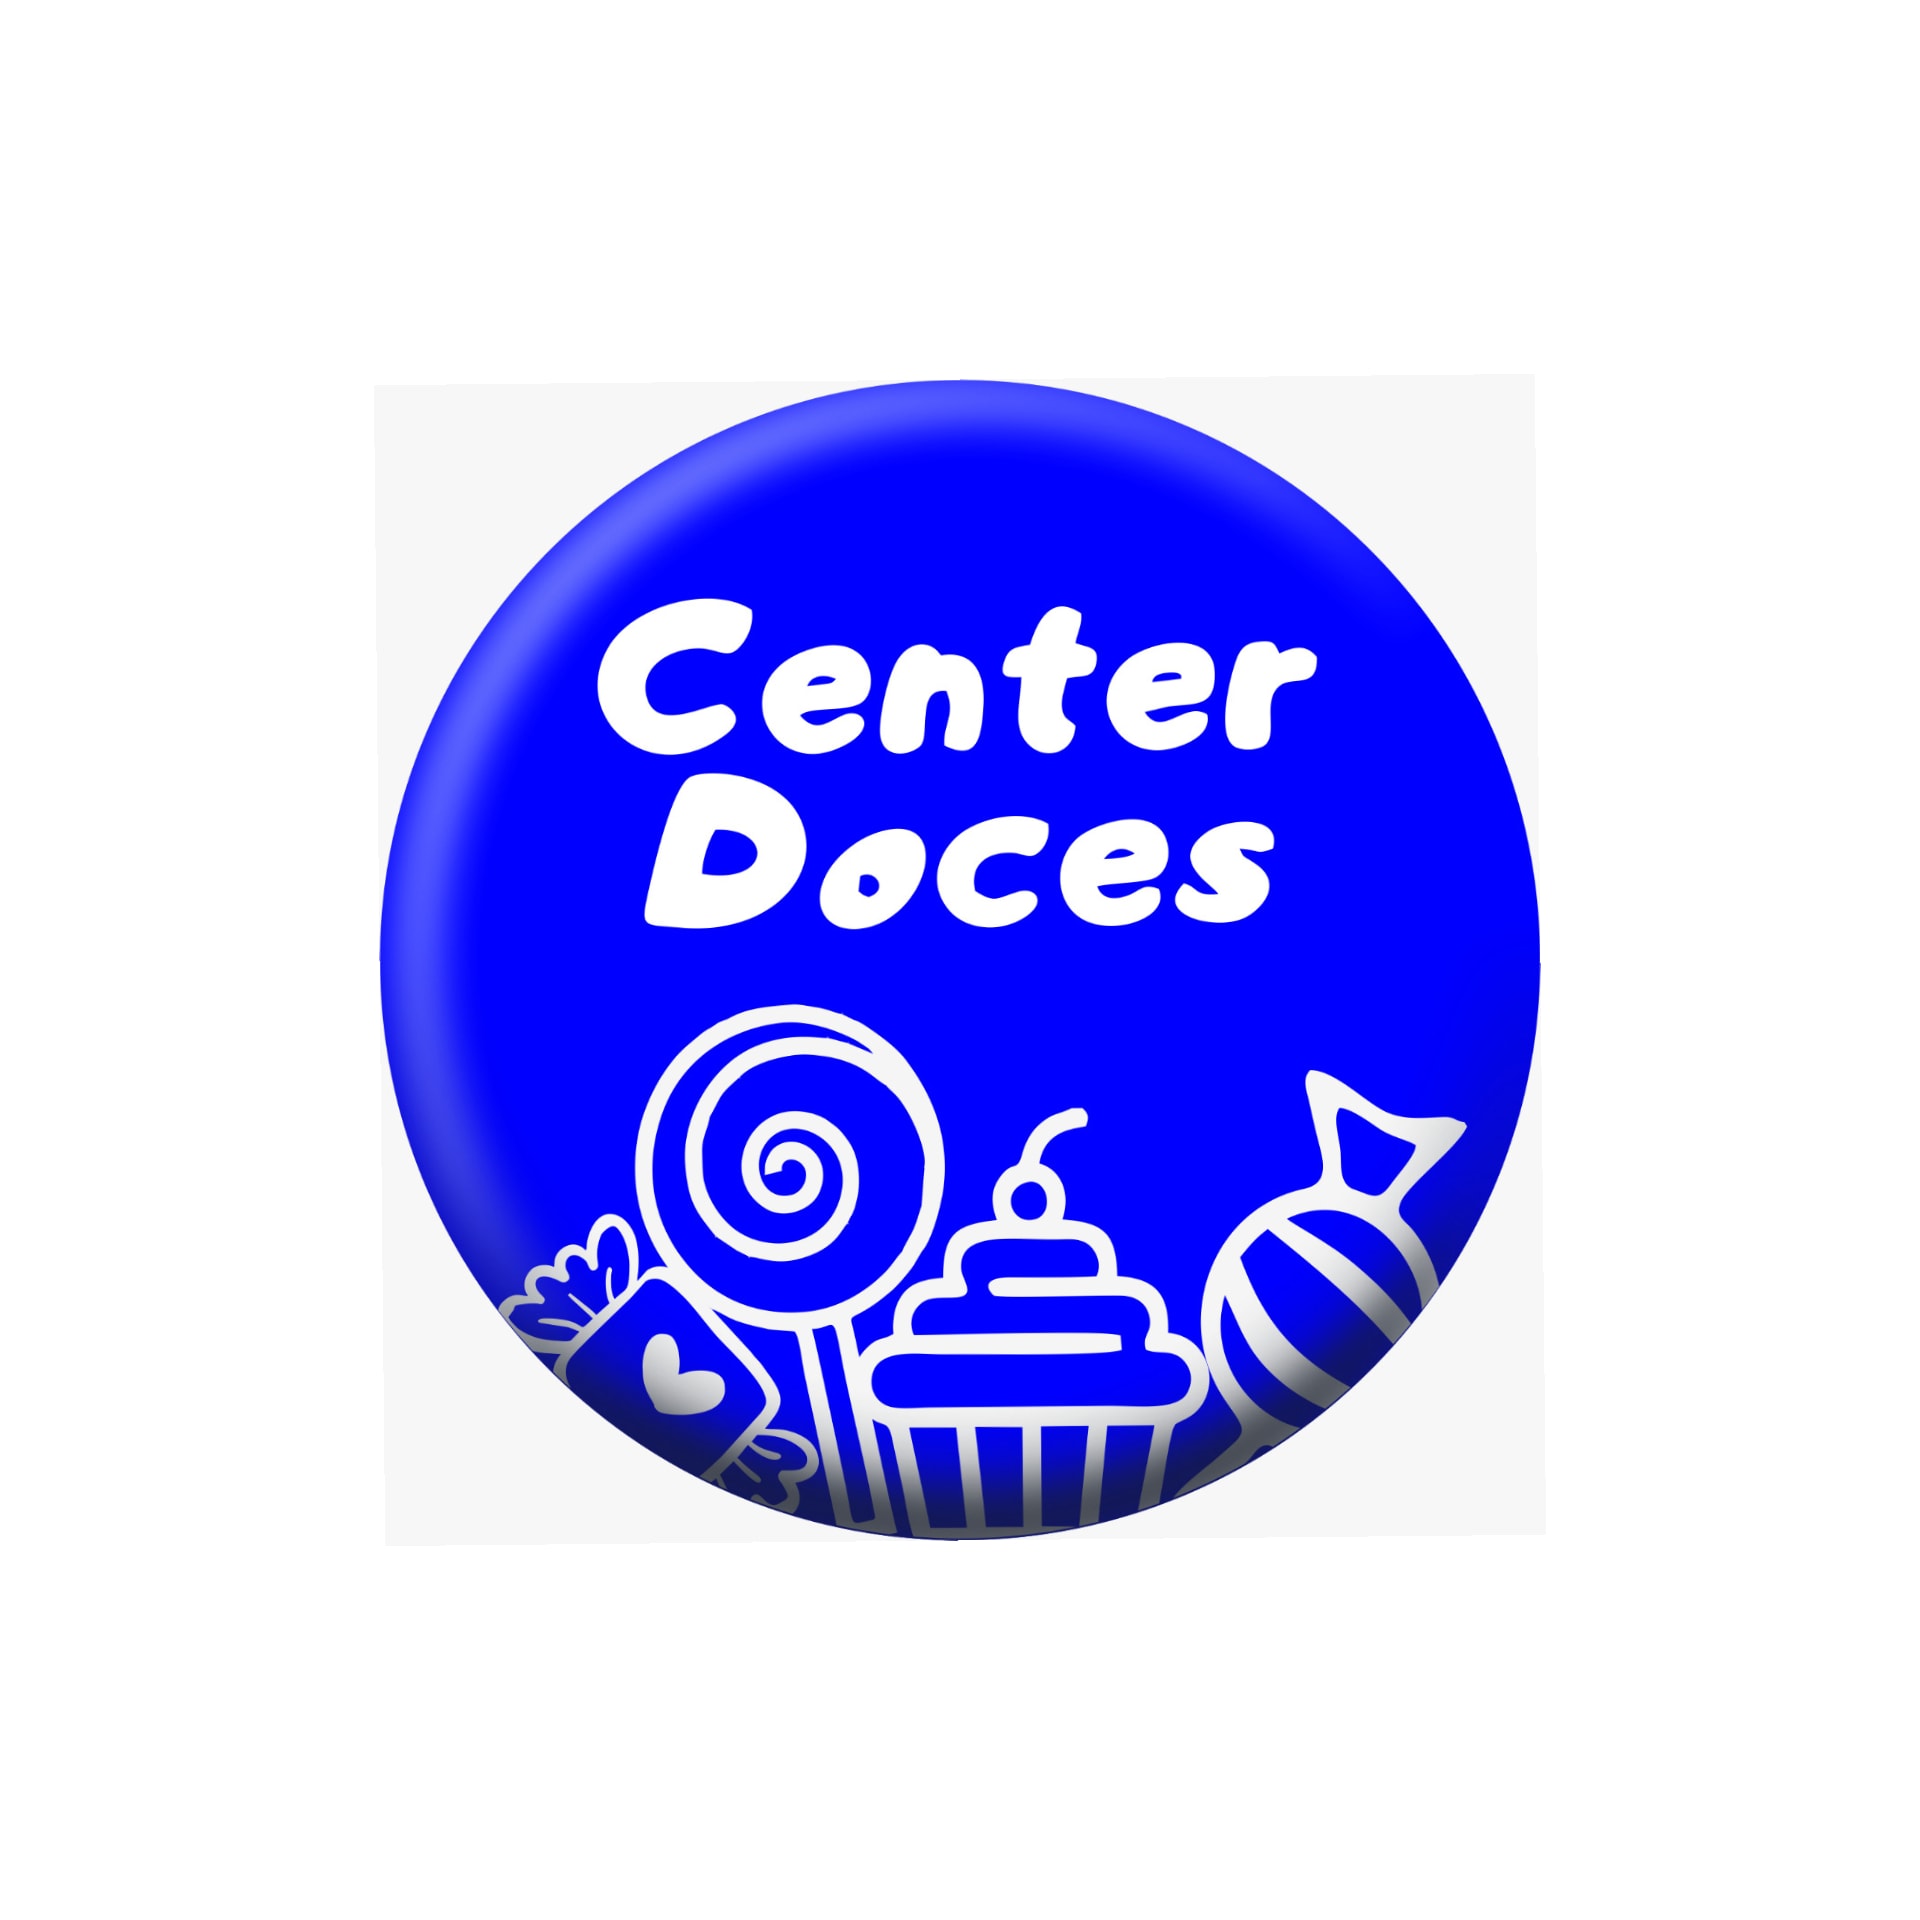 Center Doces